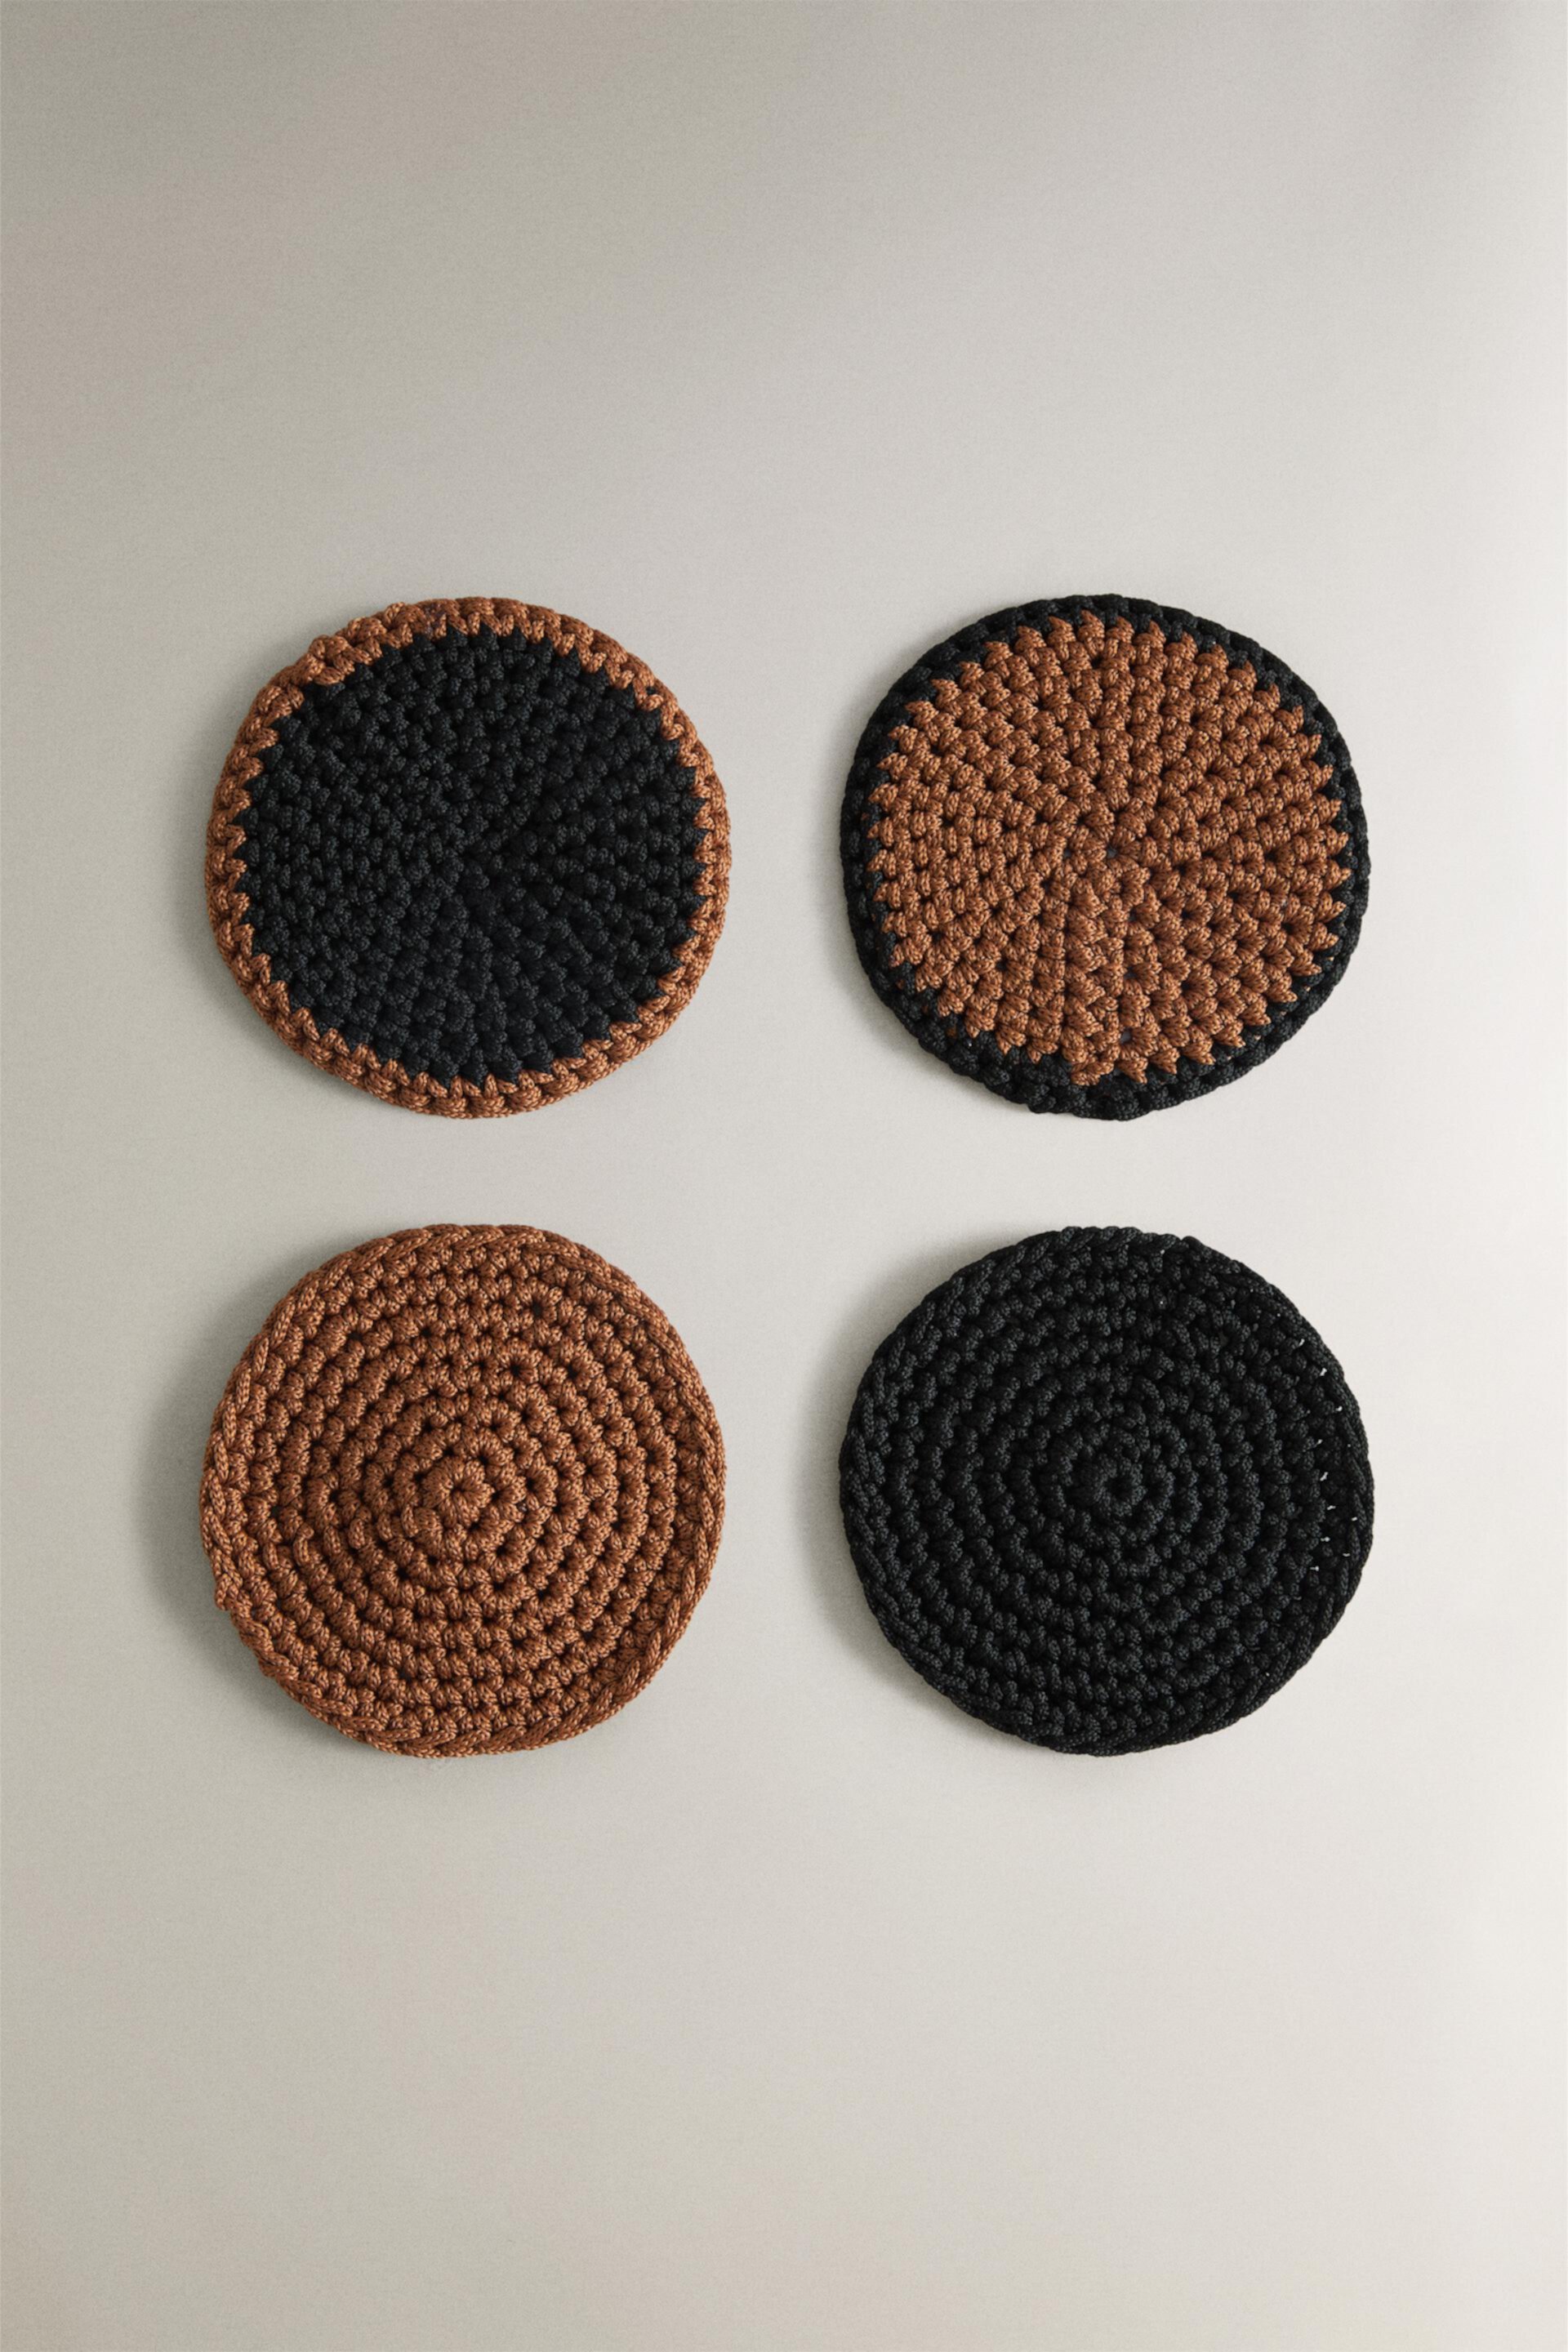 PACK OF WOVEN COASTERS (PACK OF 4) x COLLAGERIE ZARA